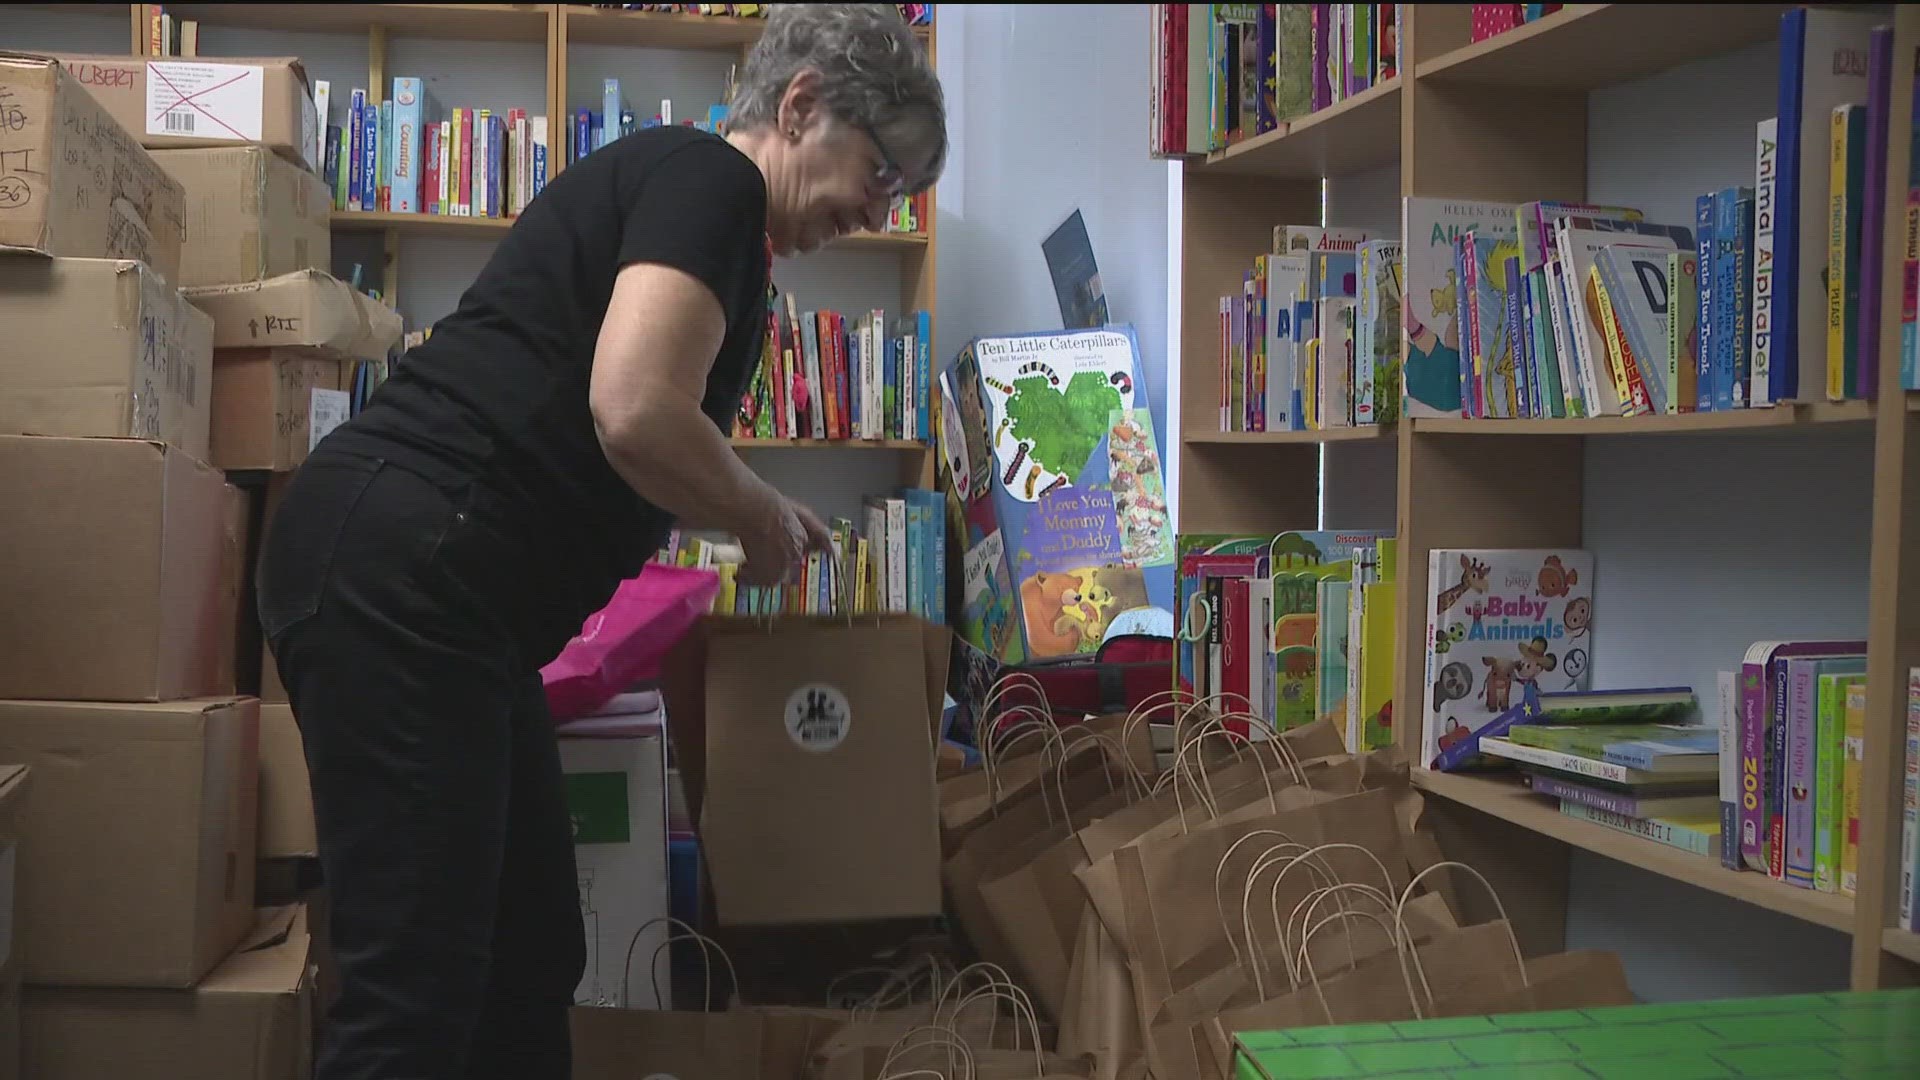 11Alive invites the public to join the campaign to help collect books this month.